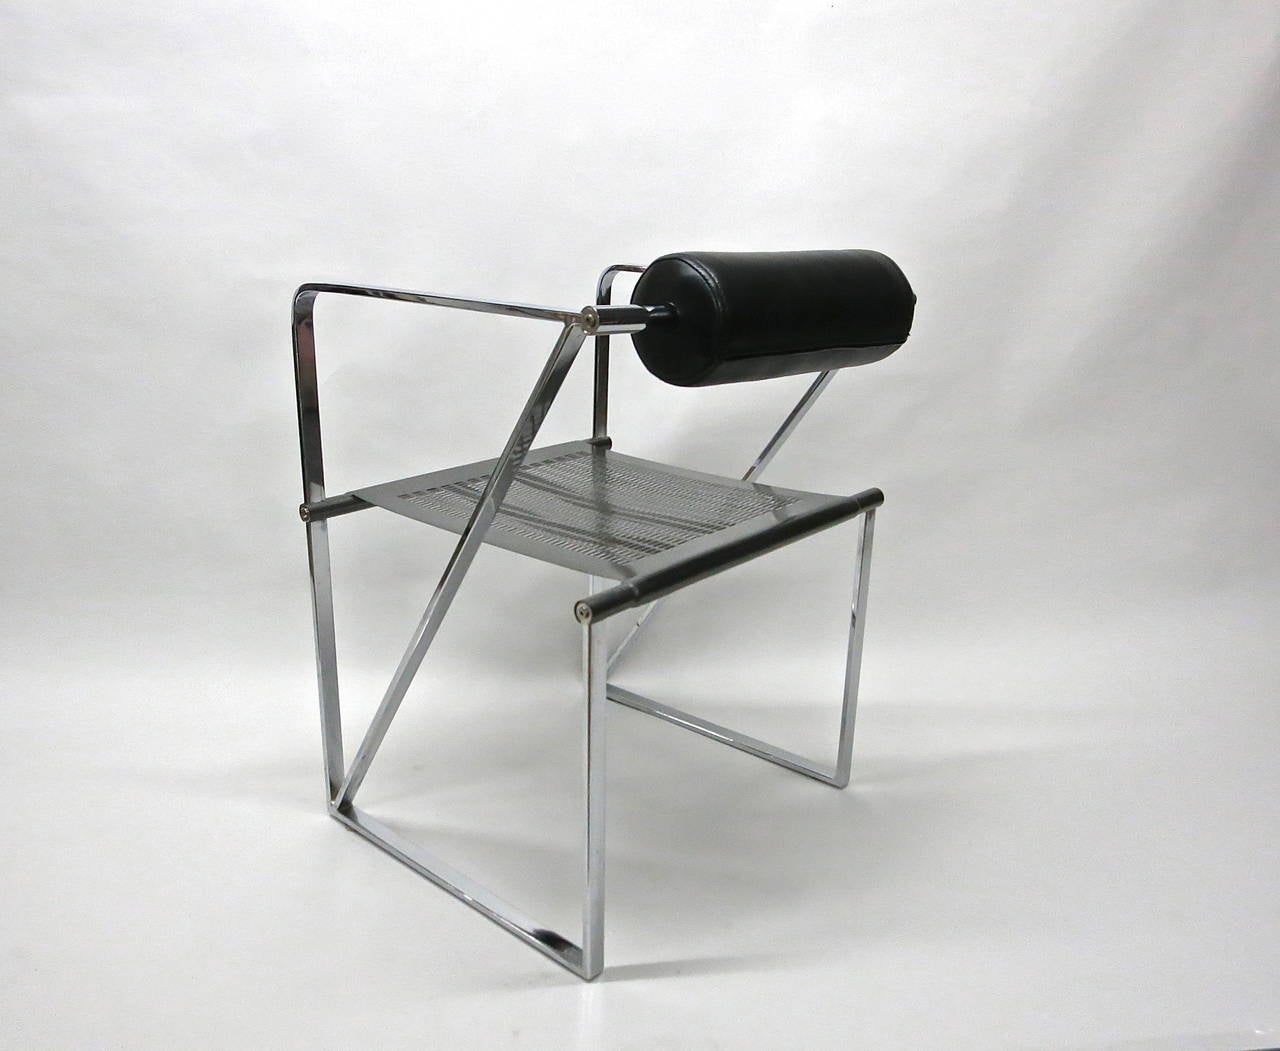 Pair of Chairs by Mario Botta, Steel and Leather, circa 1980, Made in Italy 2